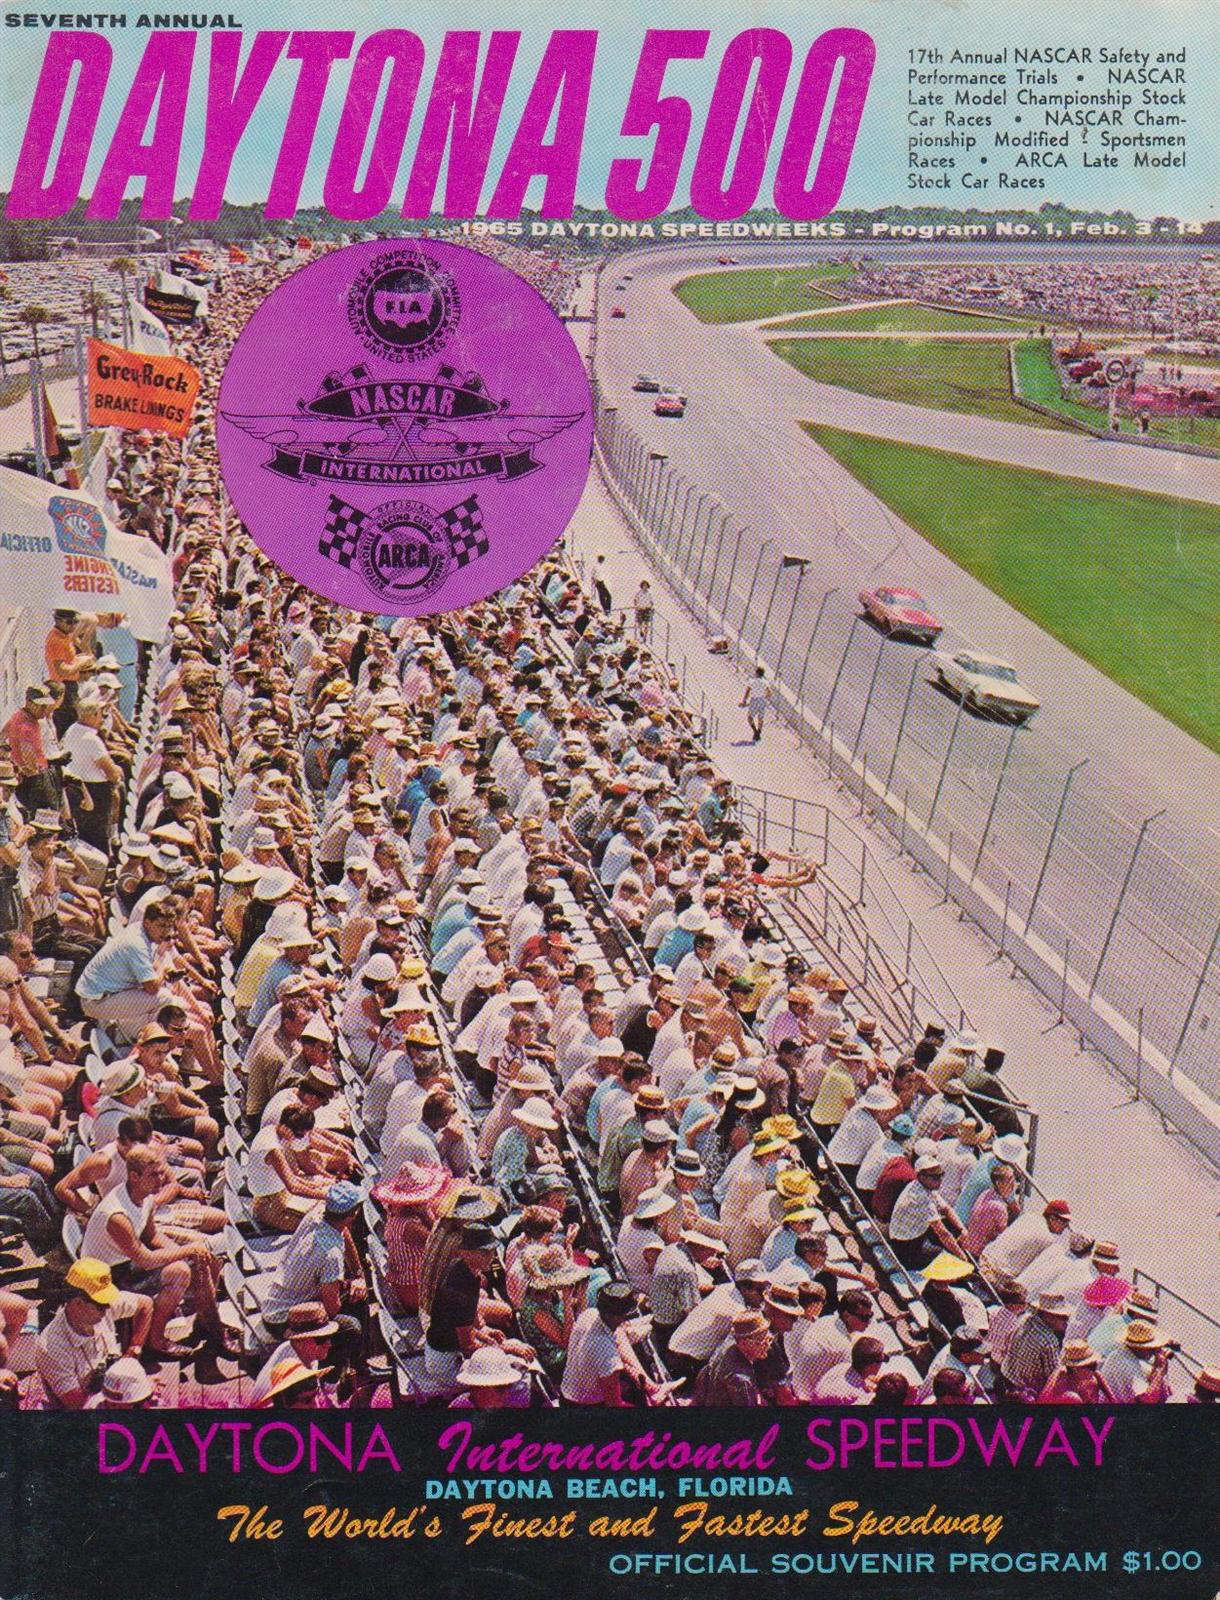 1966 Southern 500 - 1965-1966 NASCAR Grand National Series (partially lost footage of NASCAR races; 1965-1966)